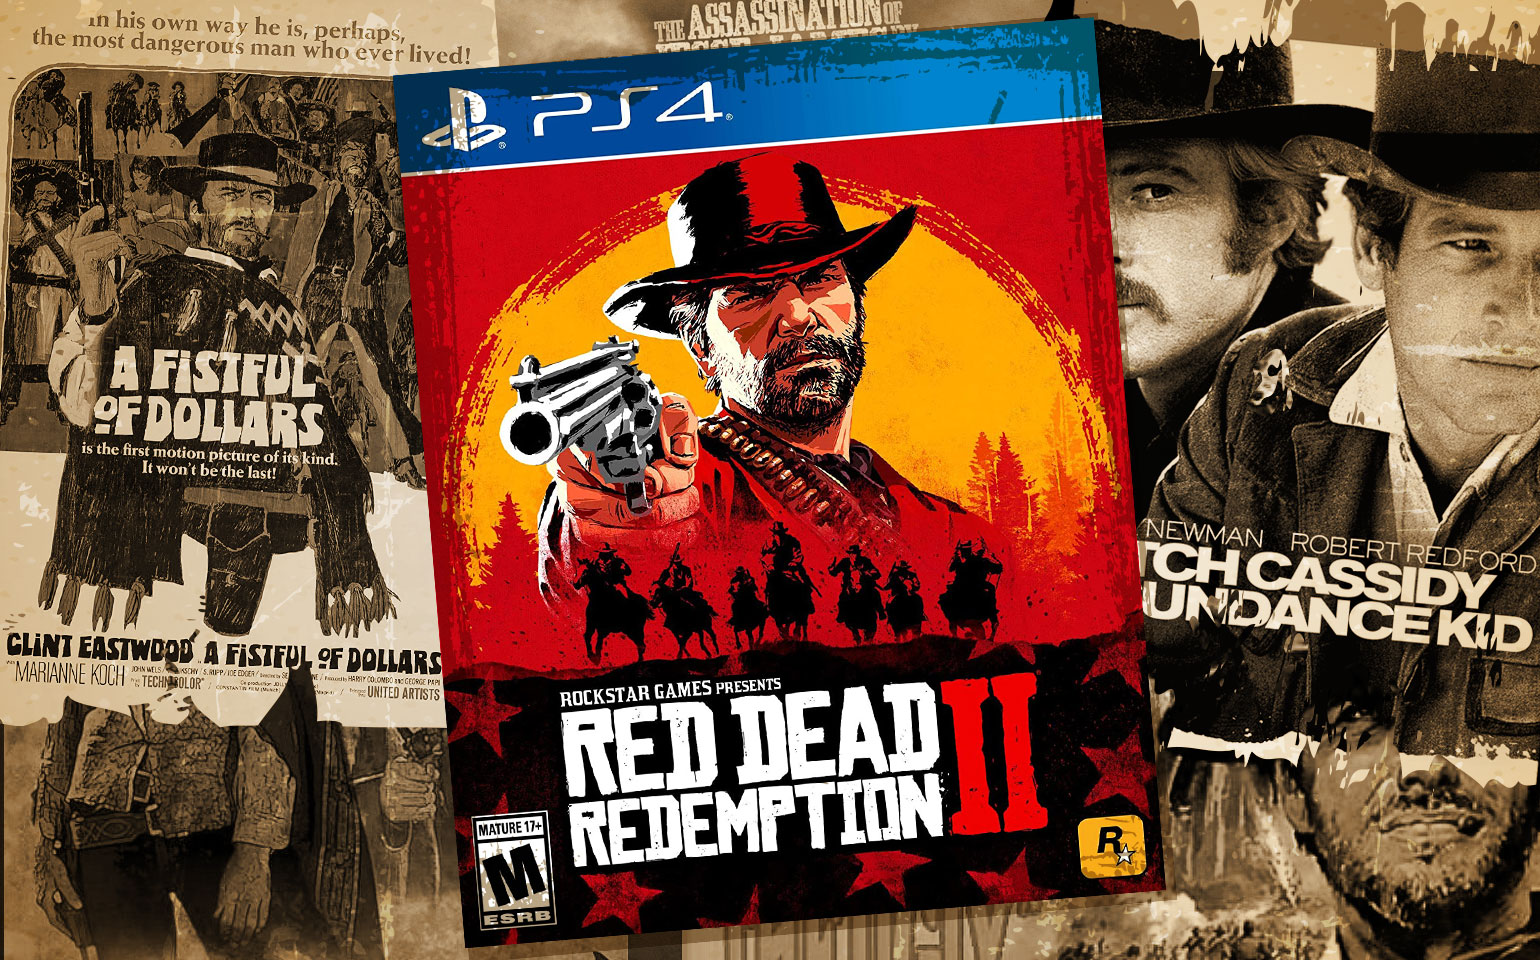 Inspiration from Spaghetti Westerns take Red Dead Redemption 2 to